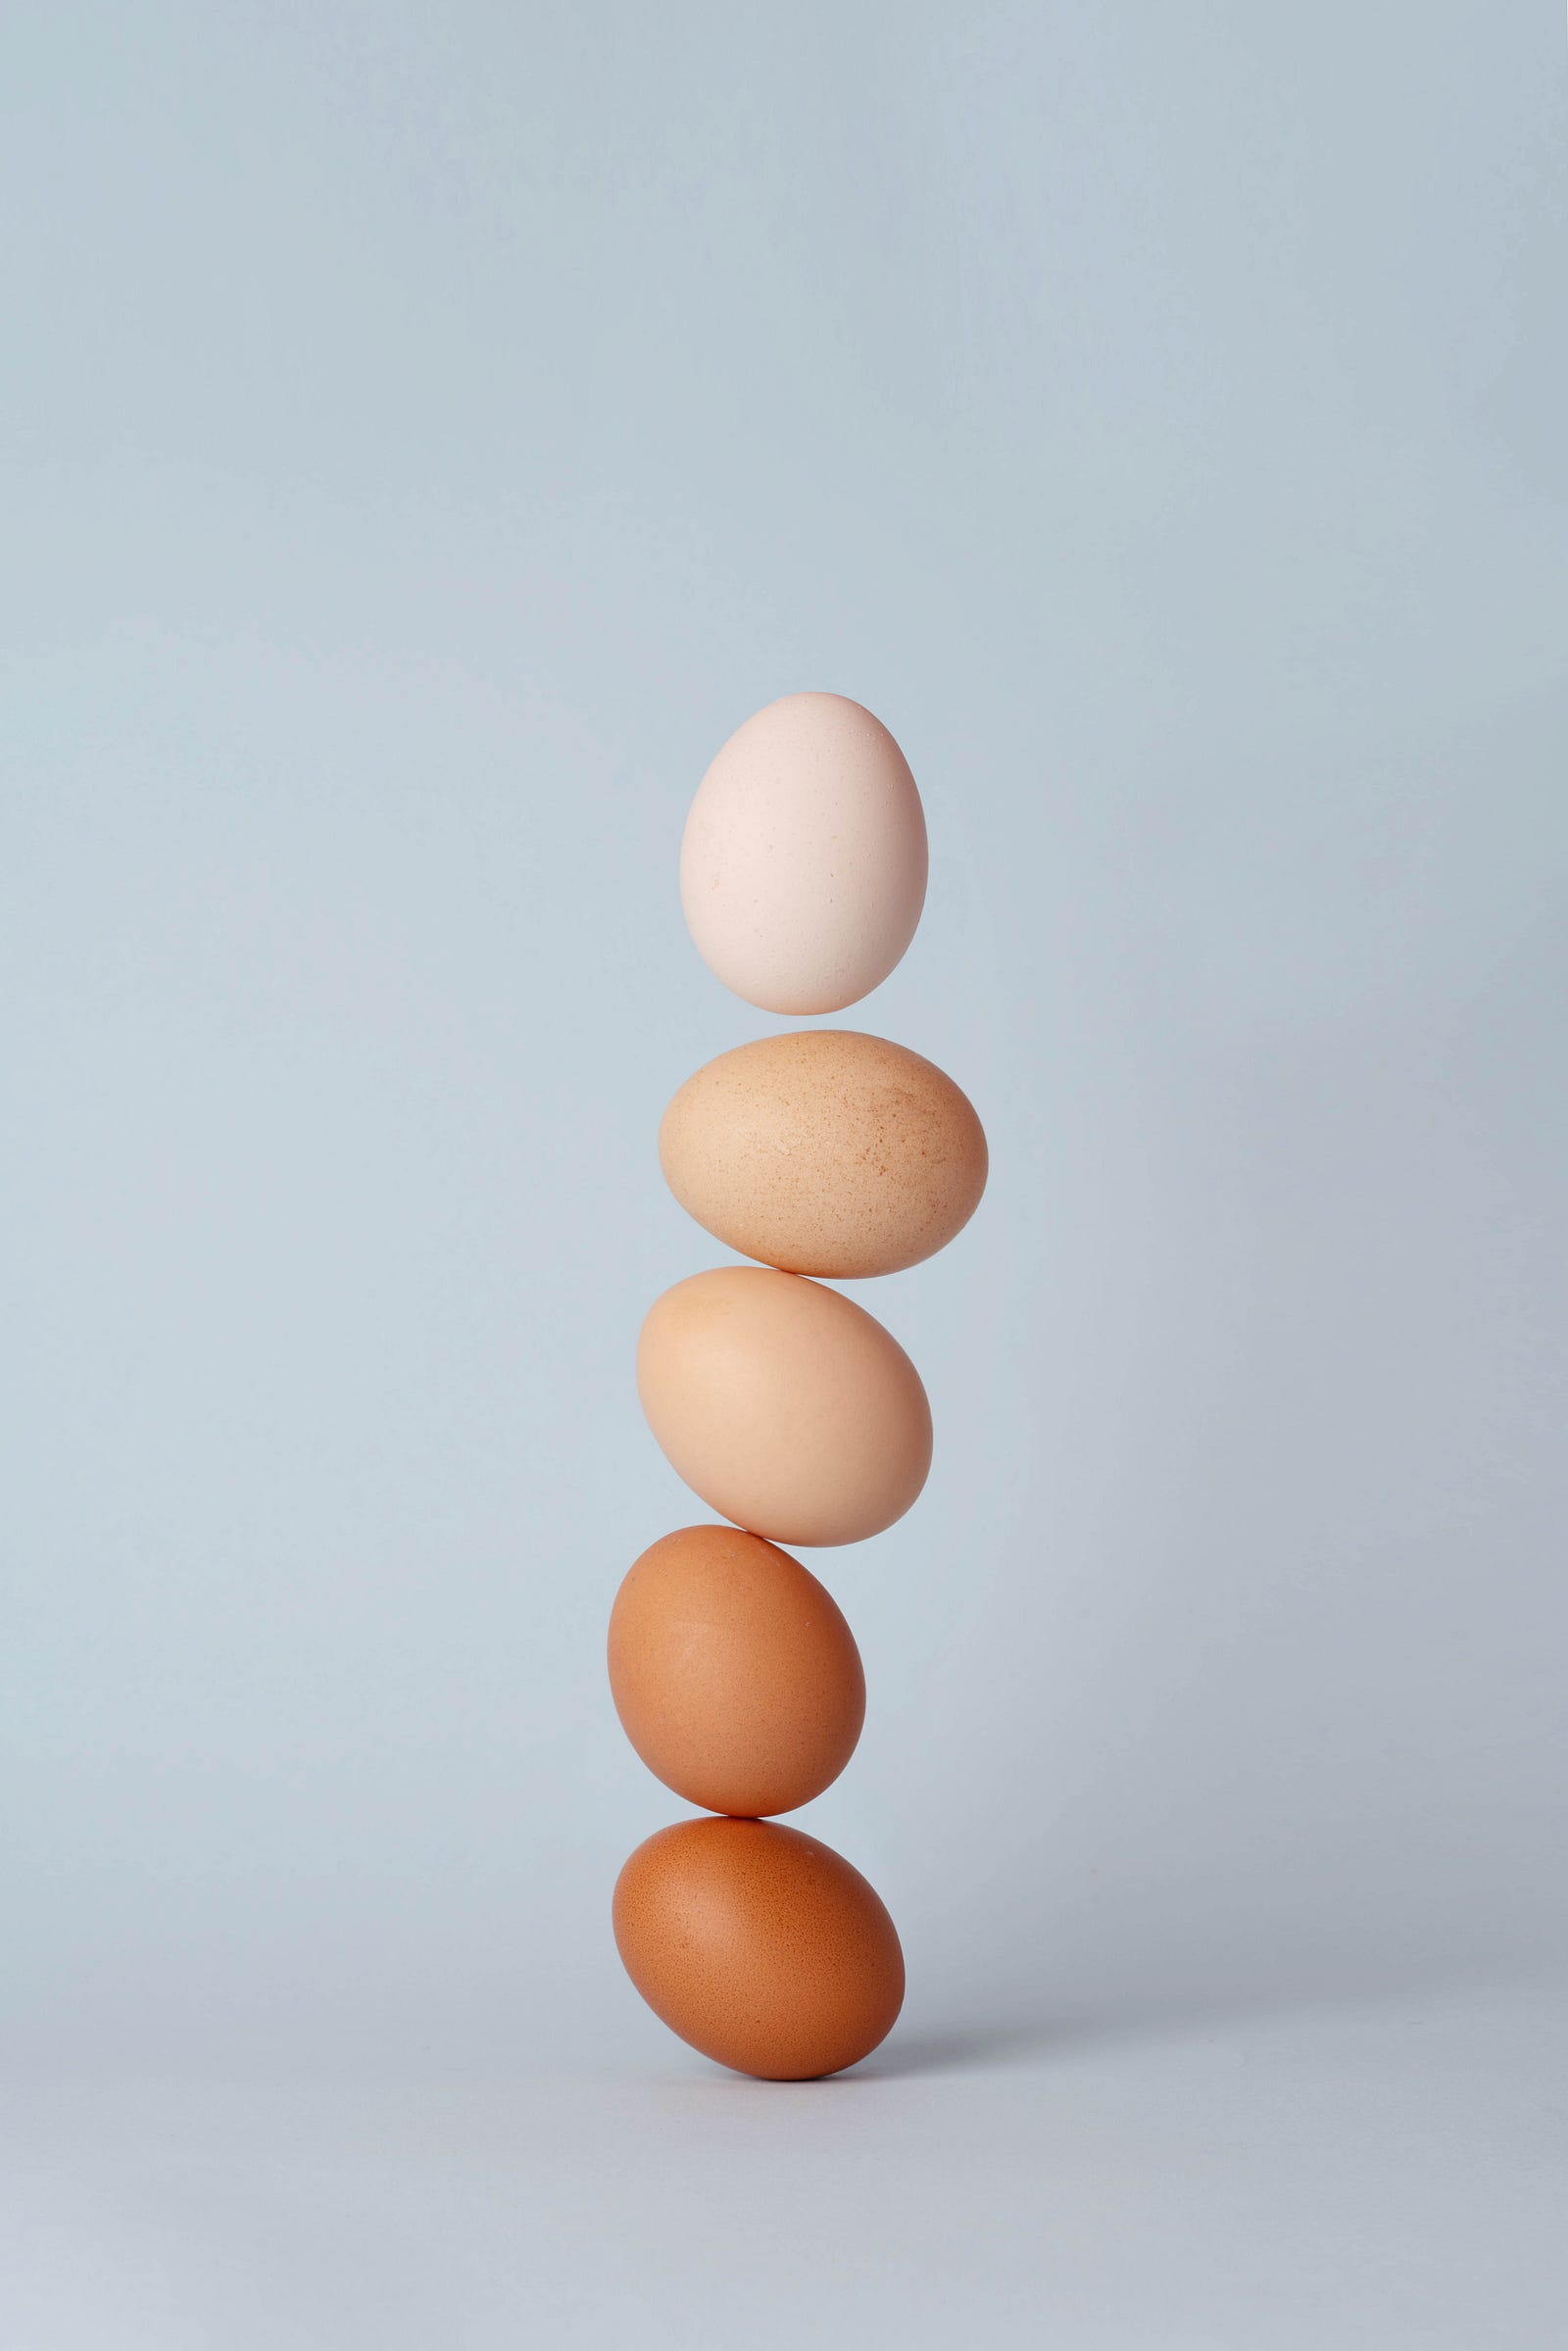 Five eggs are perched vertically on one another. The eggs range from very dark at the bottom to white at the top. There is a gray-blue background. Ten to 35 percent of your calories should come from protein. If you need 2,000 calories, that translates to 200 to 700 calories from protein (or 50 to 175 grams).